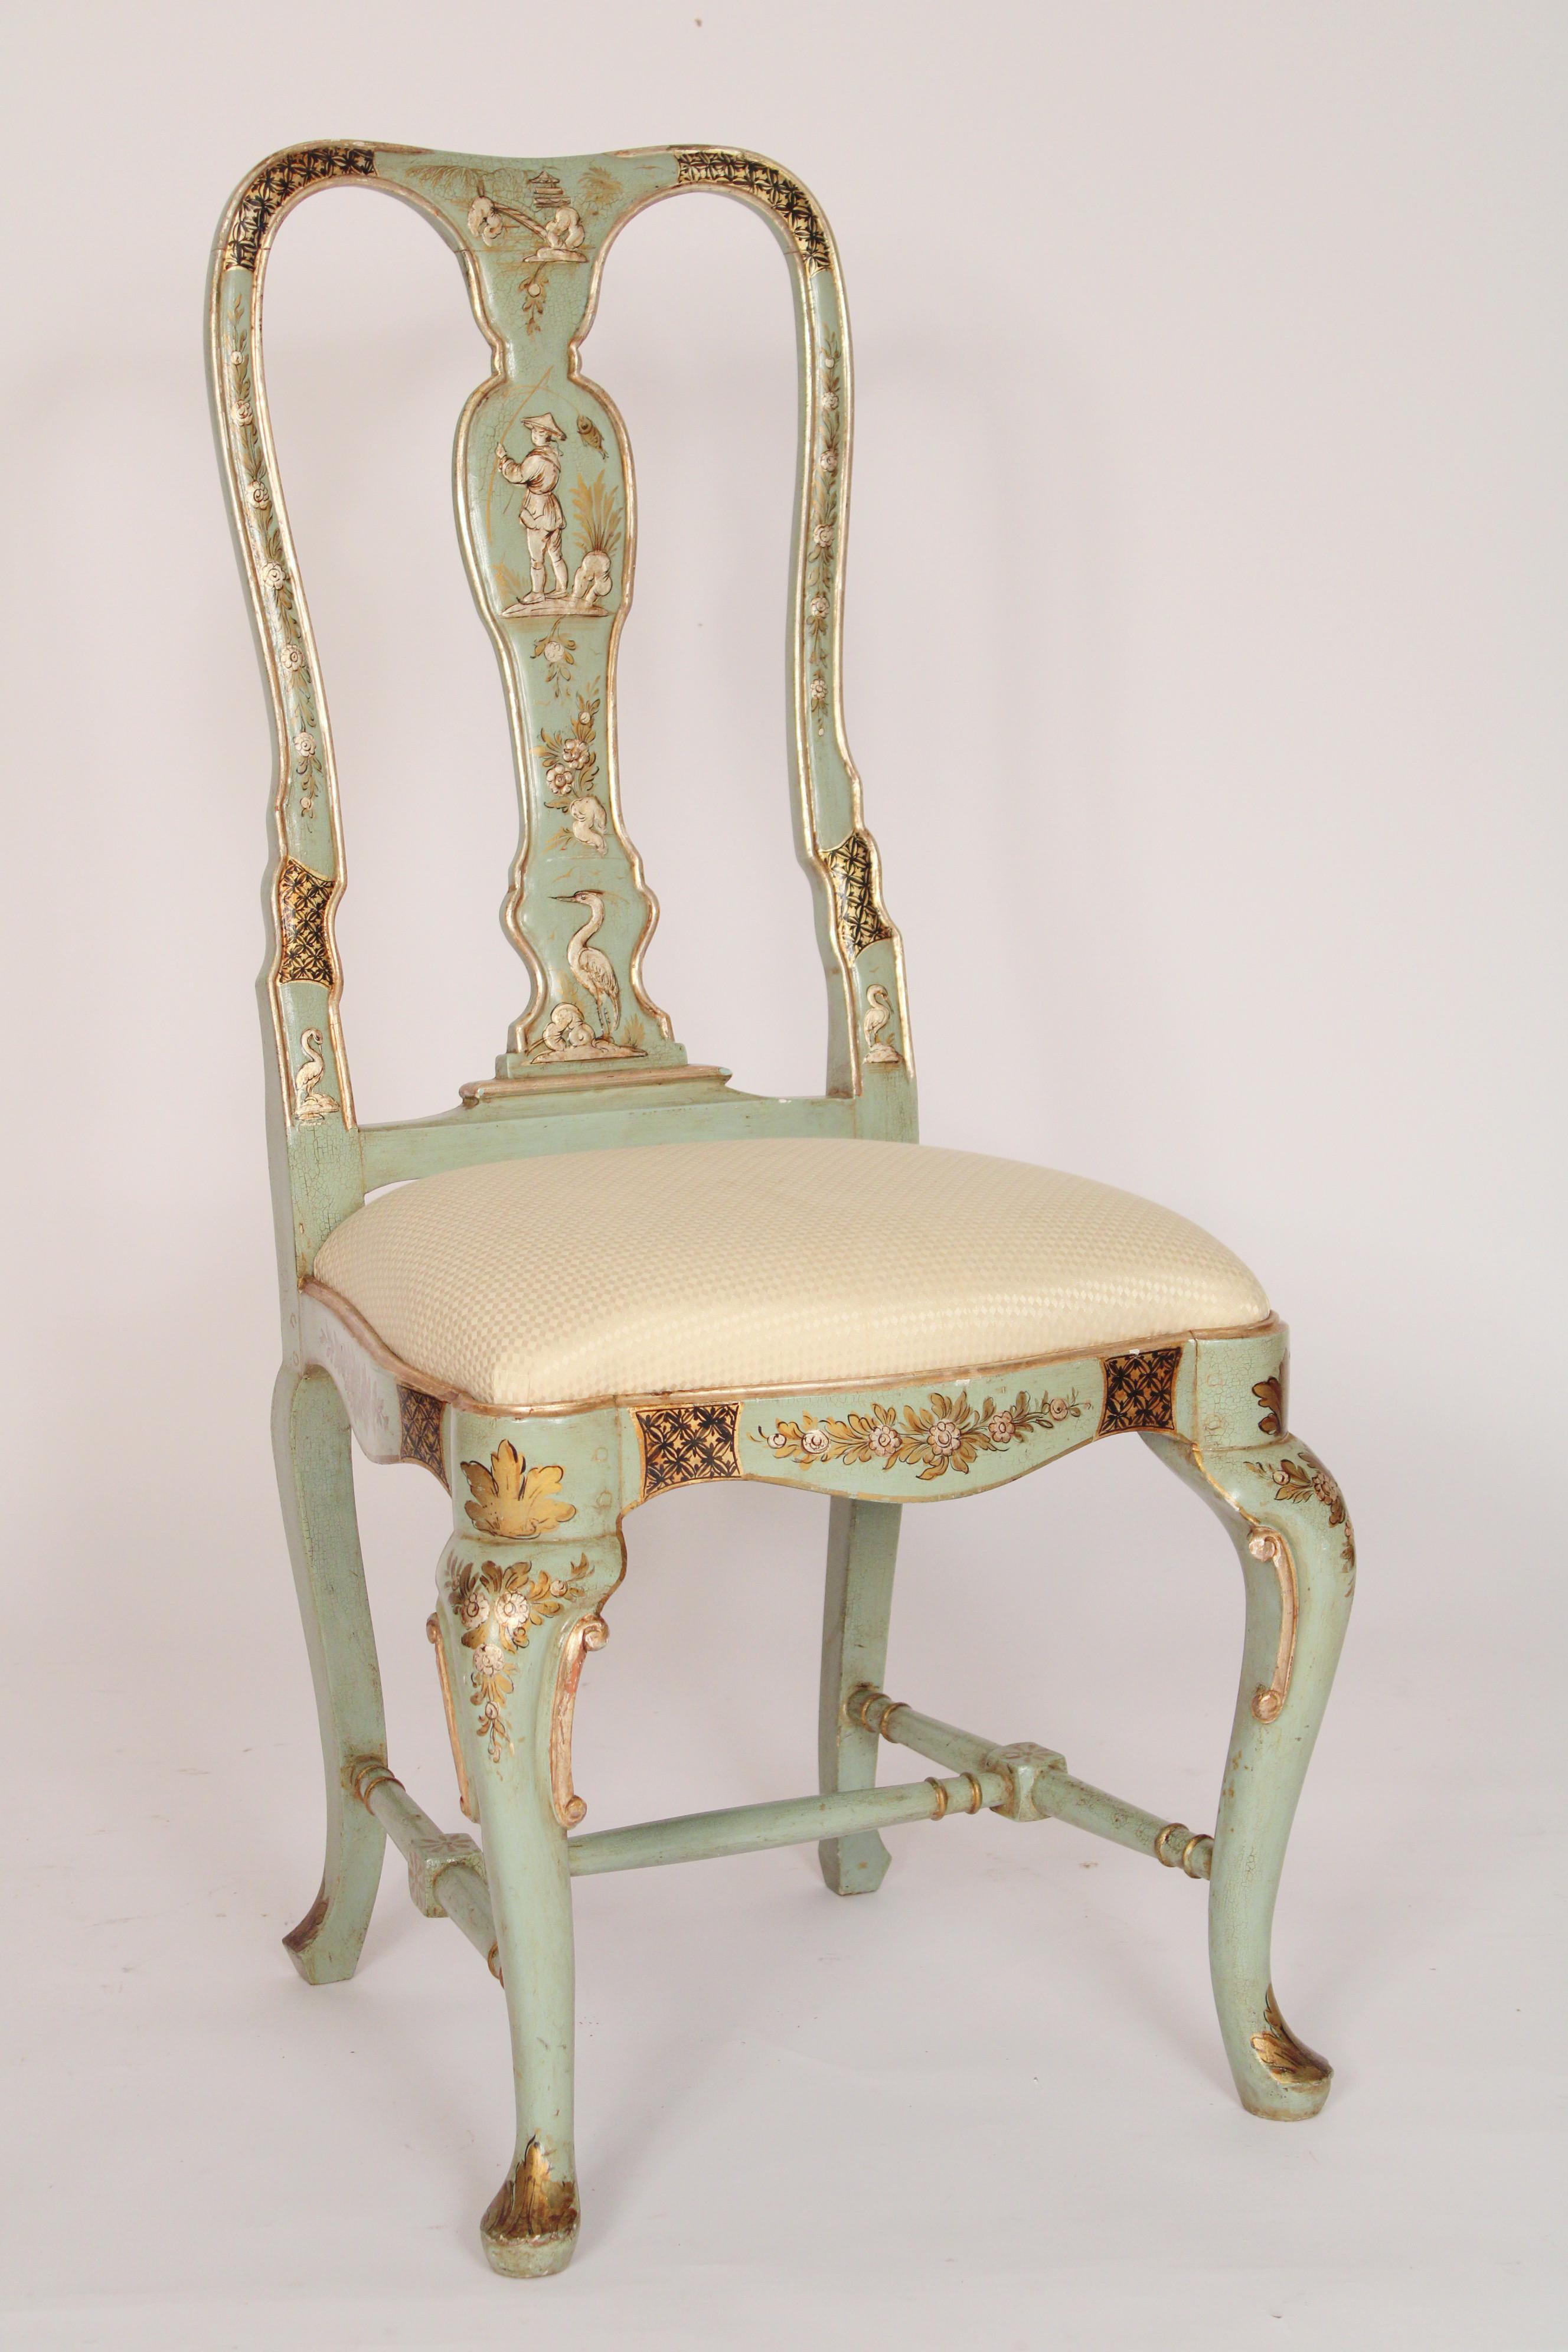 Set of 4 Queen Anne Style chinoiserie  decorated side chairs, circa 1930's. With sea foam green and raised silver leaf decoration, vase shaped back splats each back splat with figures in different pursuits, fisherman etc. , resting on cabriole legs